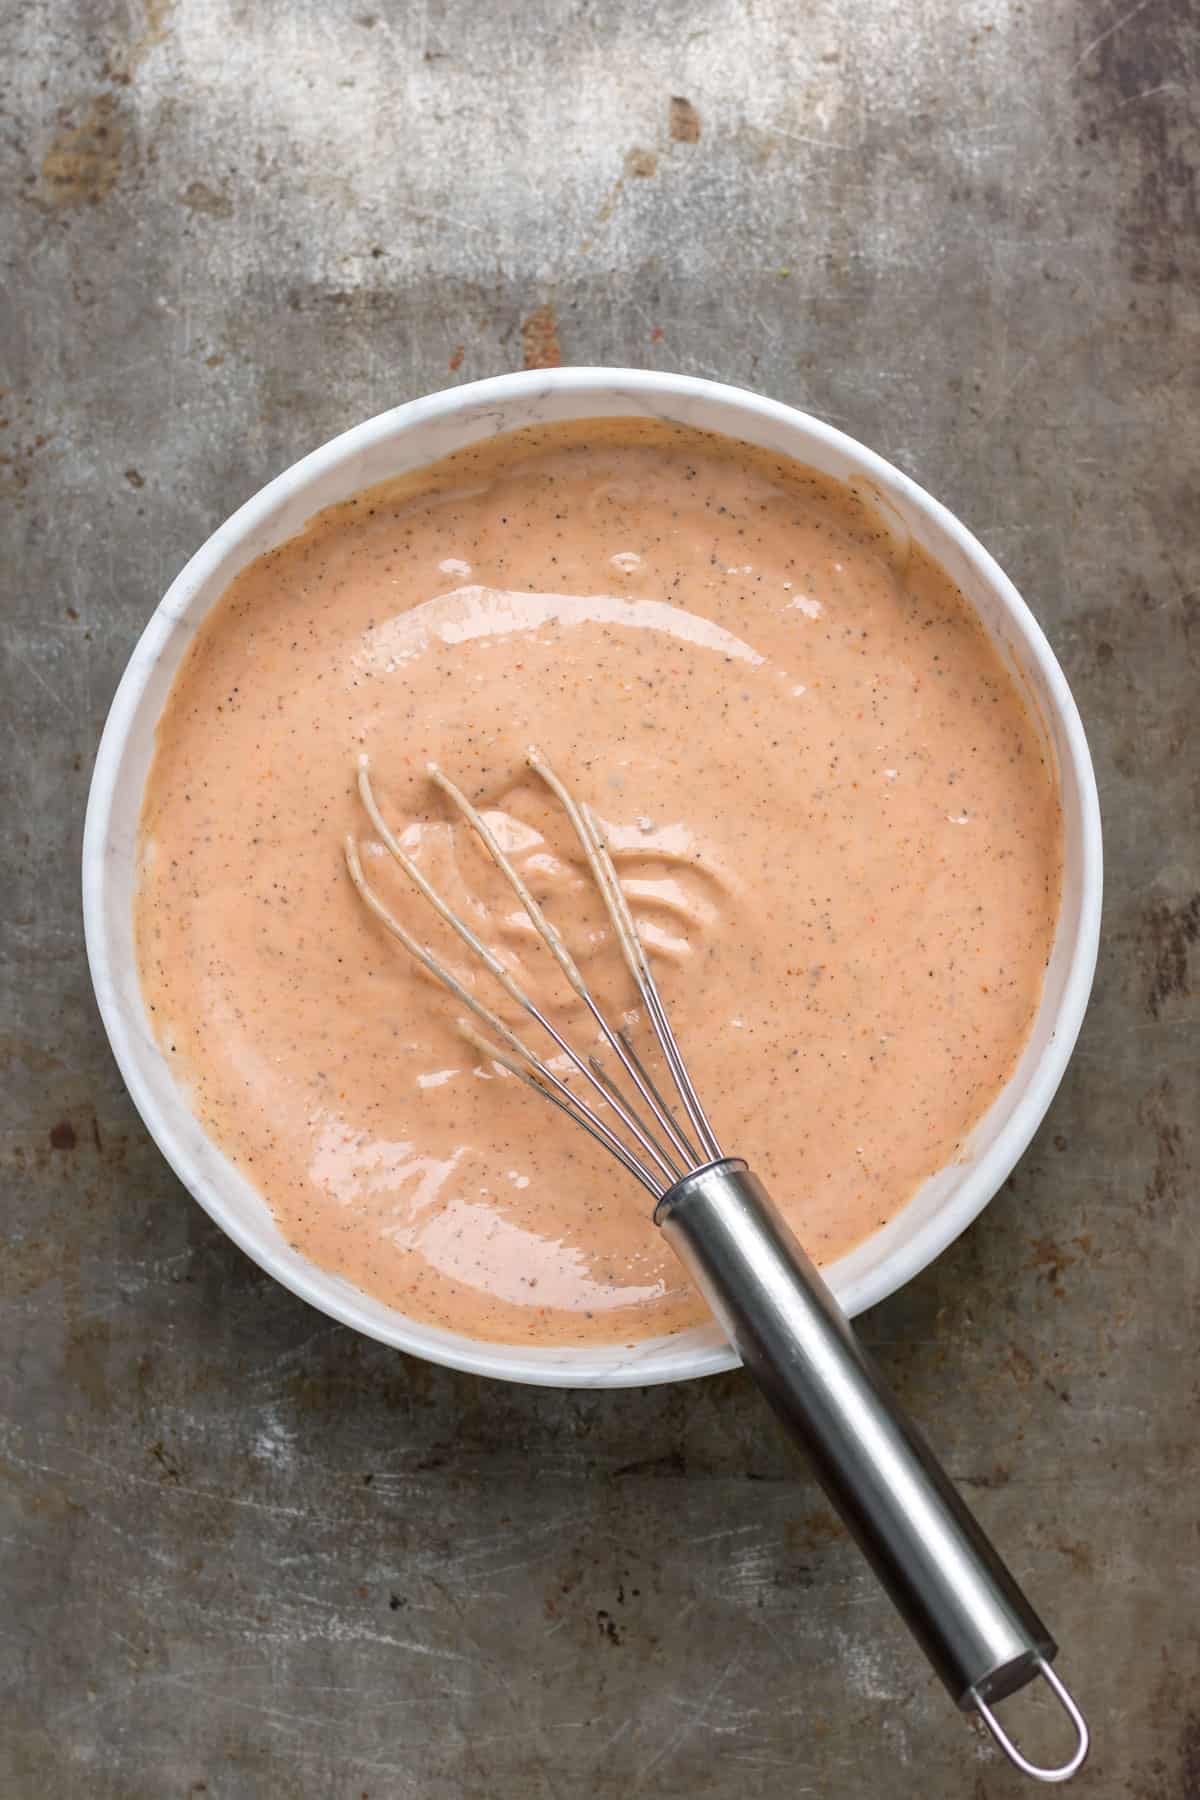 Sauce whisked in a bowl.